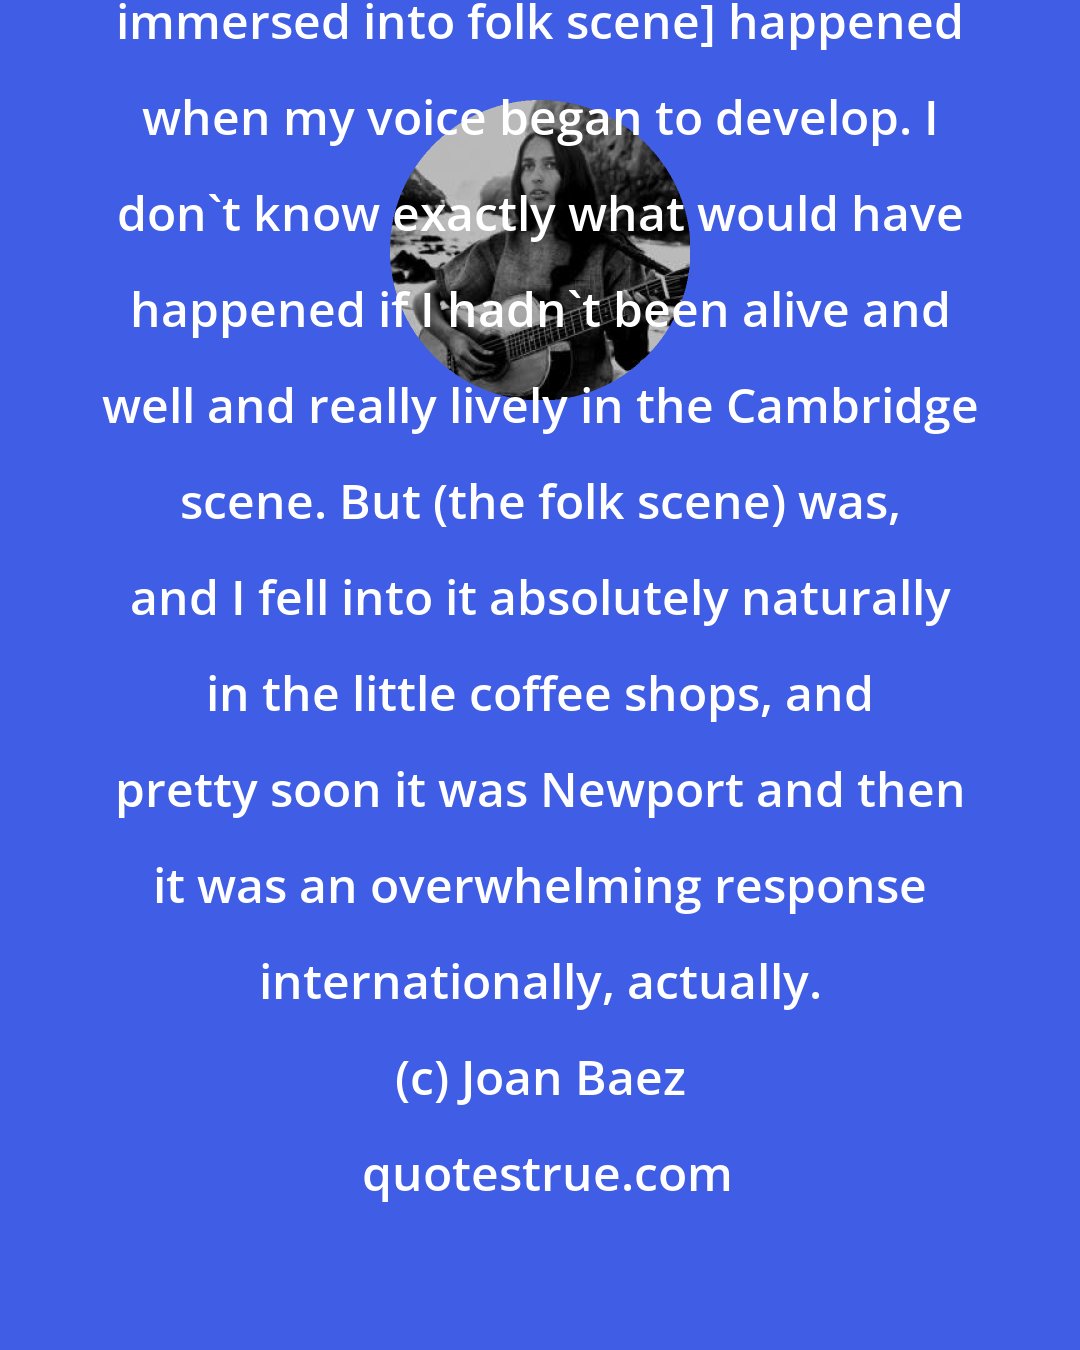 Joan Baez: That was sheer luck that it [being immersed into folk scene] happened when my voice began to develop. I don't know exactly what would have happened if I hadn't been alive and well and really lively in the Cambridge scene. But (the folk scene) was, and I fell into it absolutely naturally in the little coffee shops, and pretty soon it was Newport and then it was an overwhelming response internationally, actually.